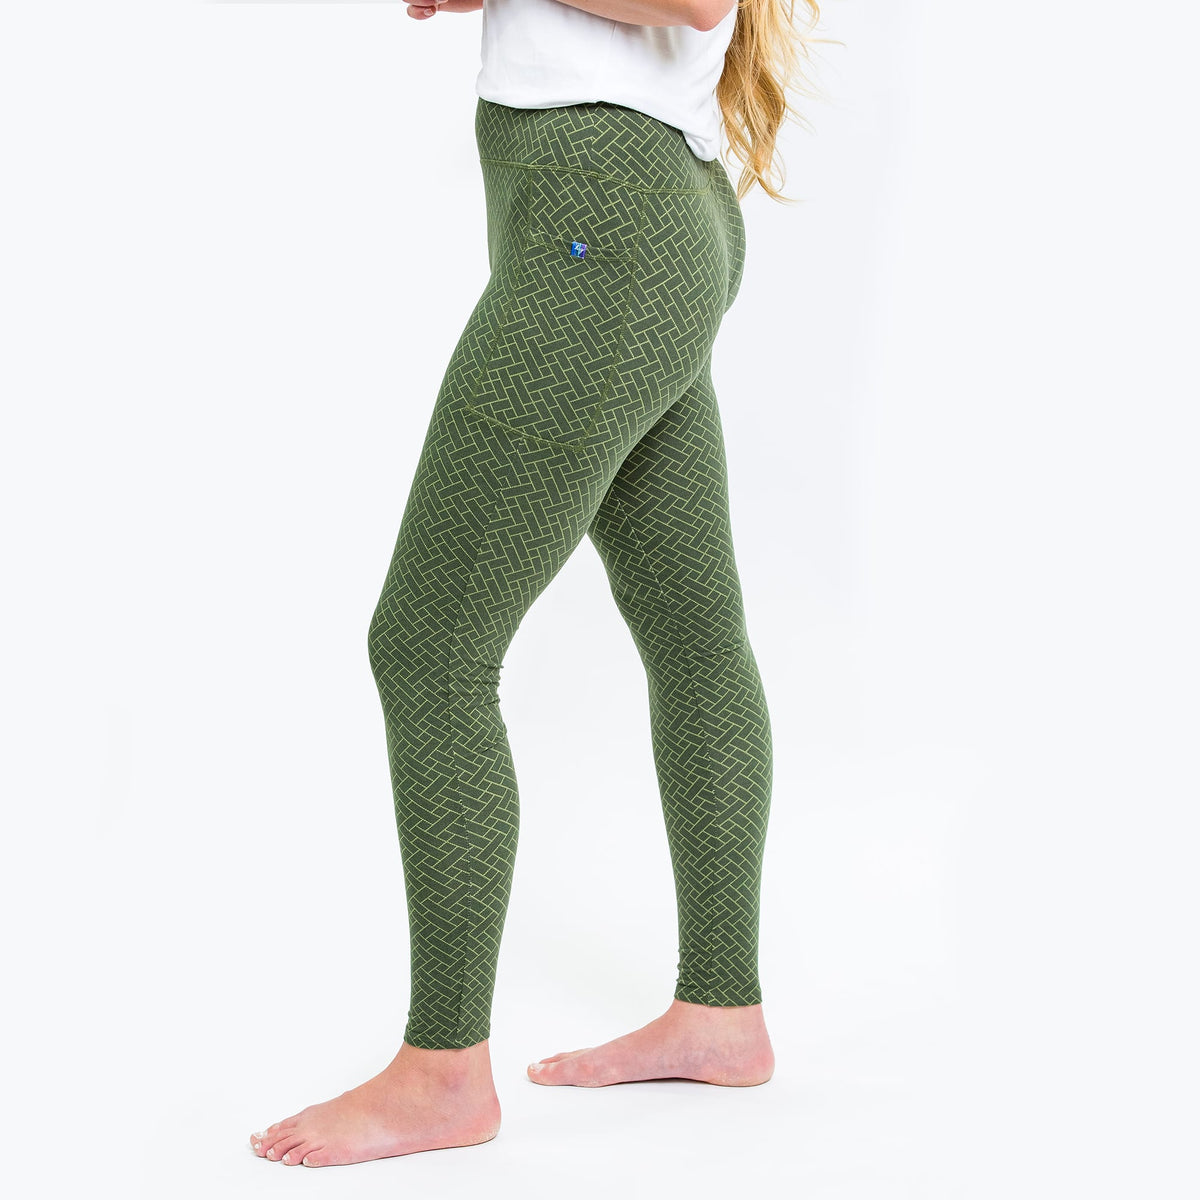 Parrot Green Solid Ankle Length Legging - VALLES365 by S.C. - 4144992